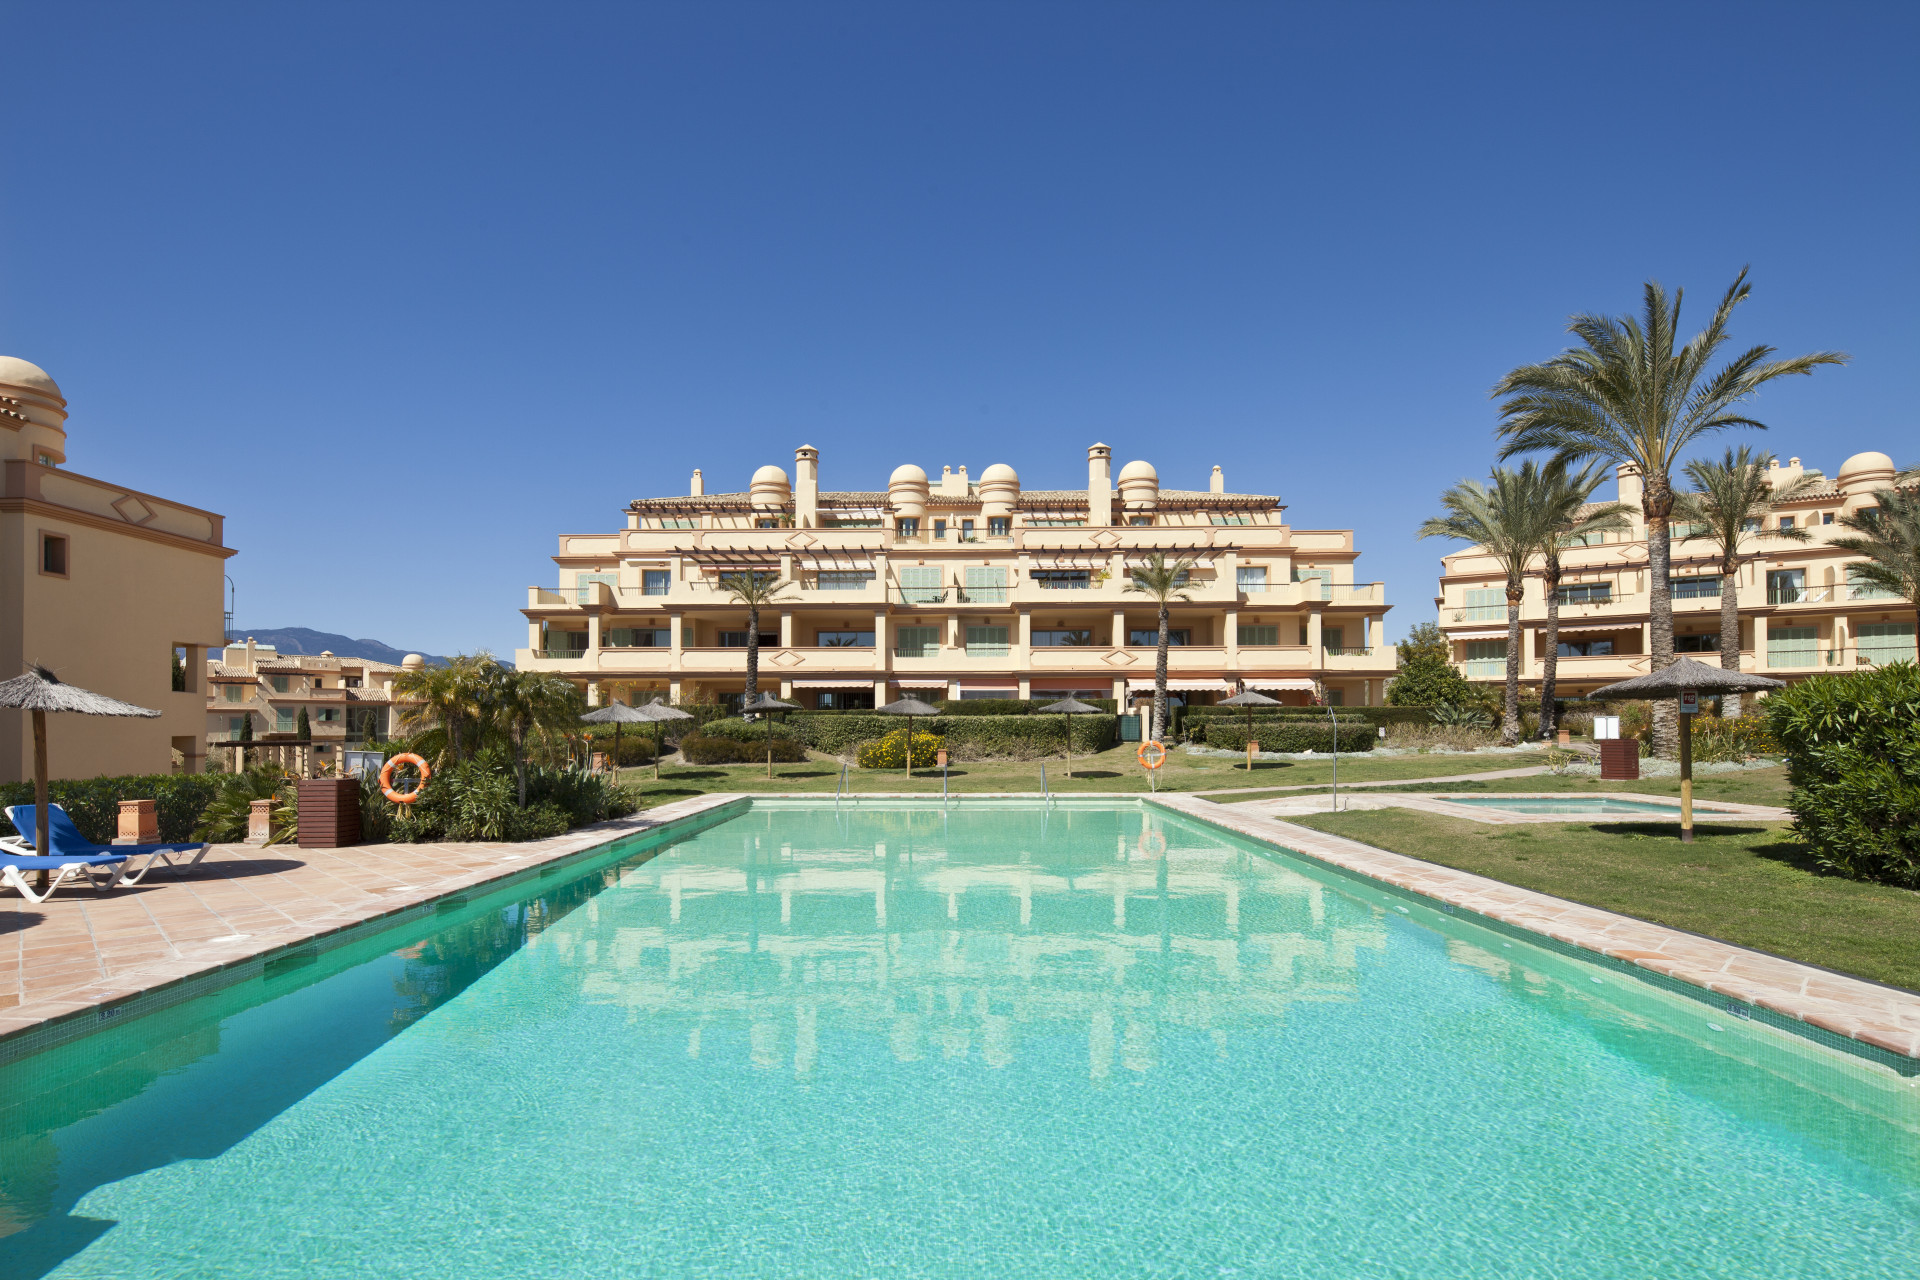 Wonderful apartment in Four Seasons Flamingos overlooking the main pool and with panoramic views to the sea!